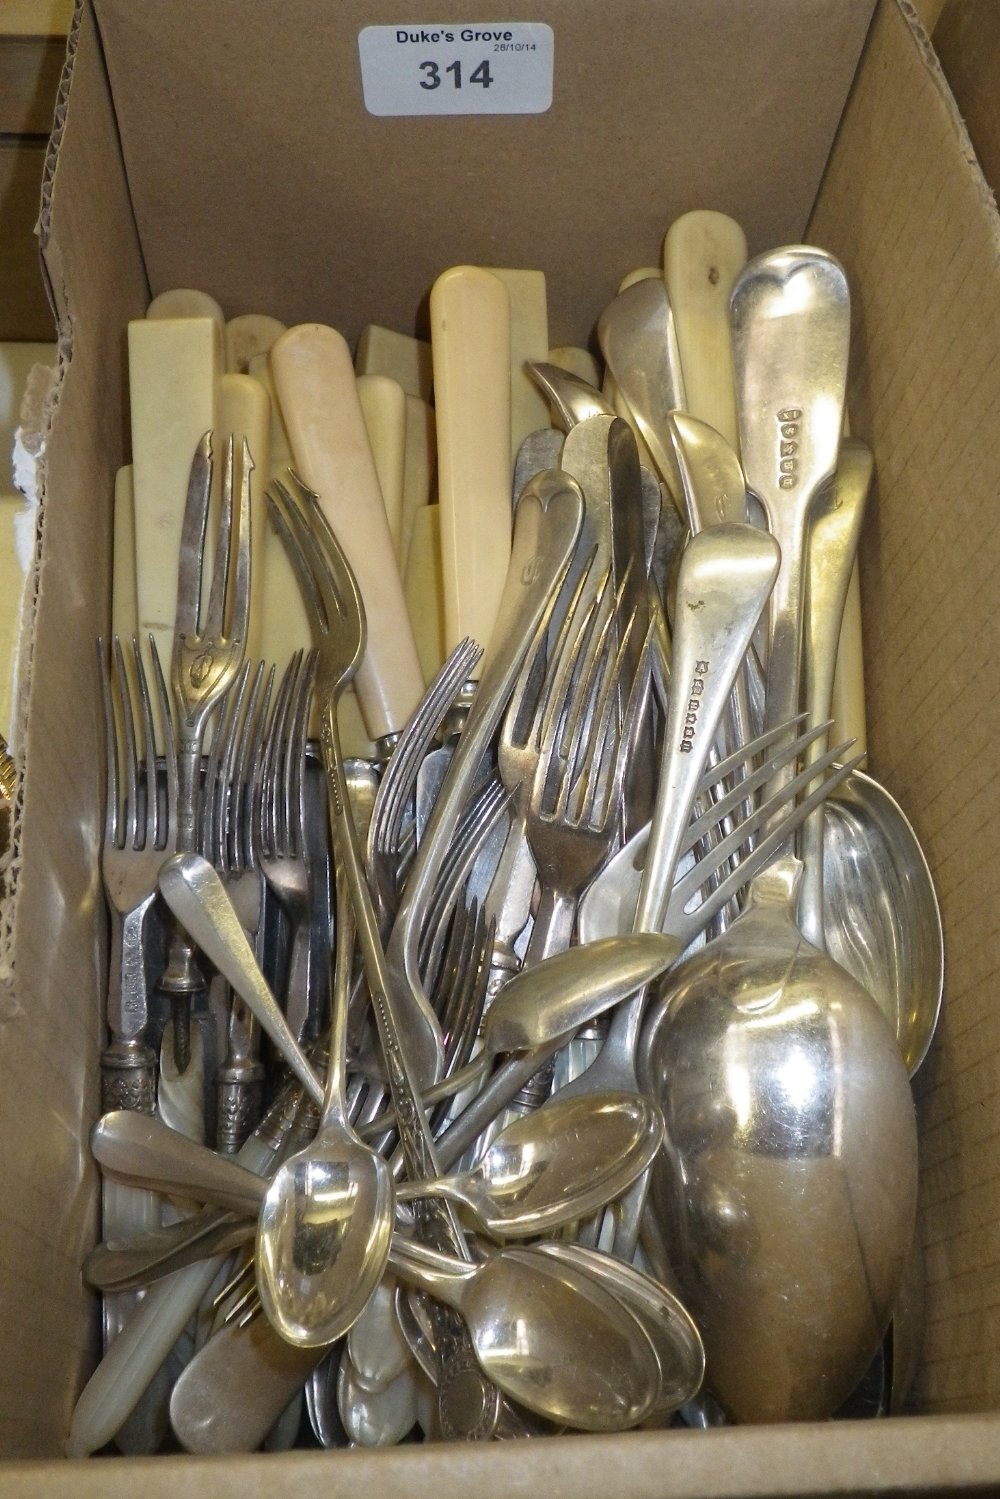 A quantity of assorted cutlery including spoons, forks and knives